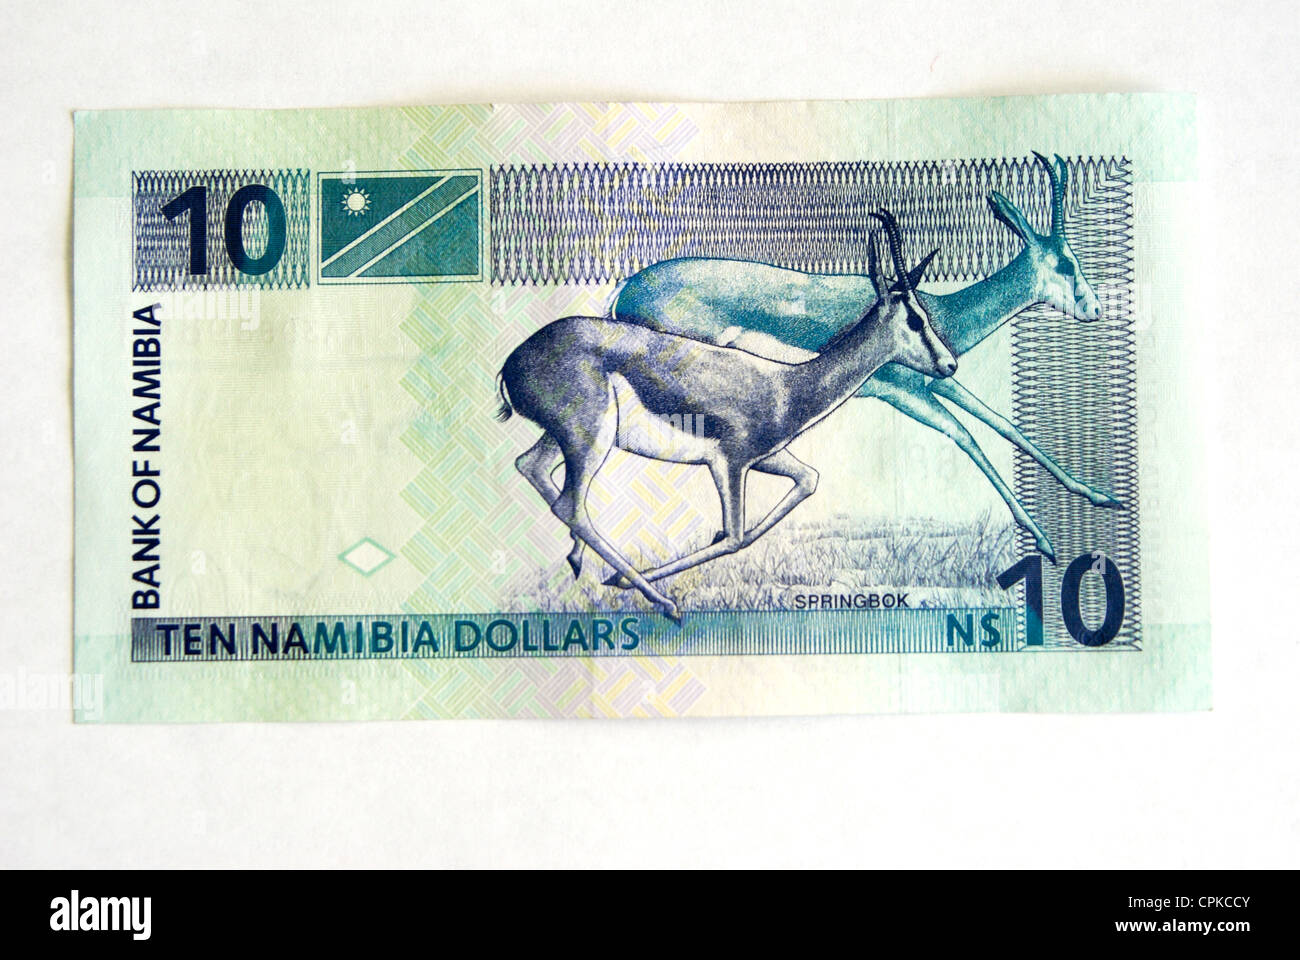 Currency of Namibia (Namibia dollar) (reverse side) Stock Photo